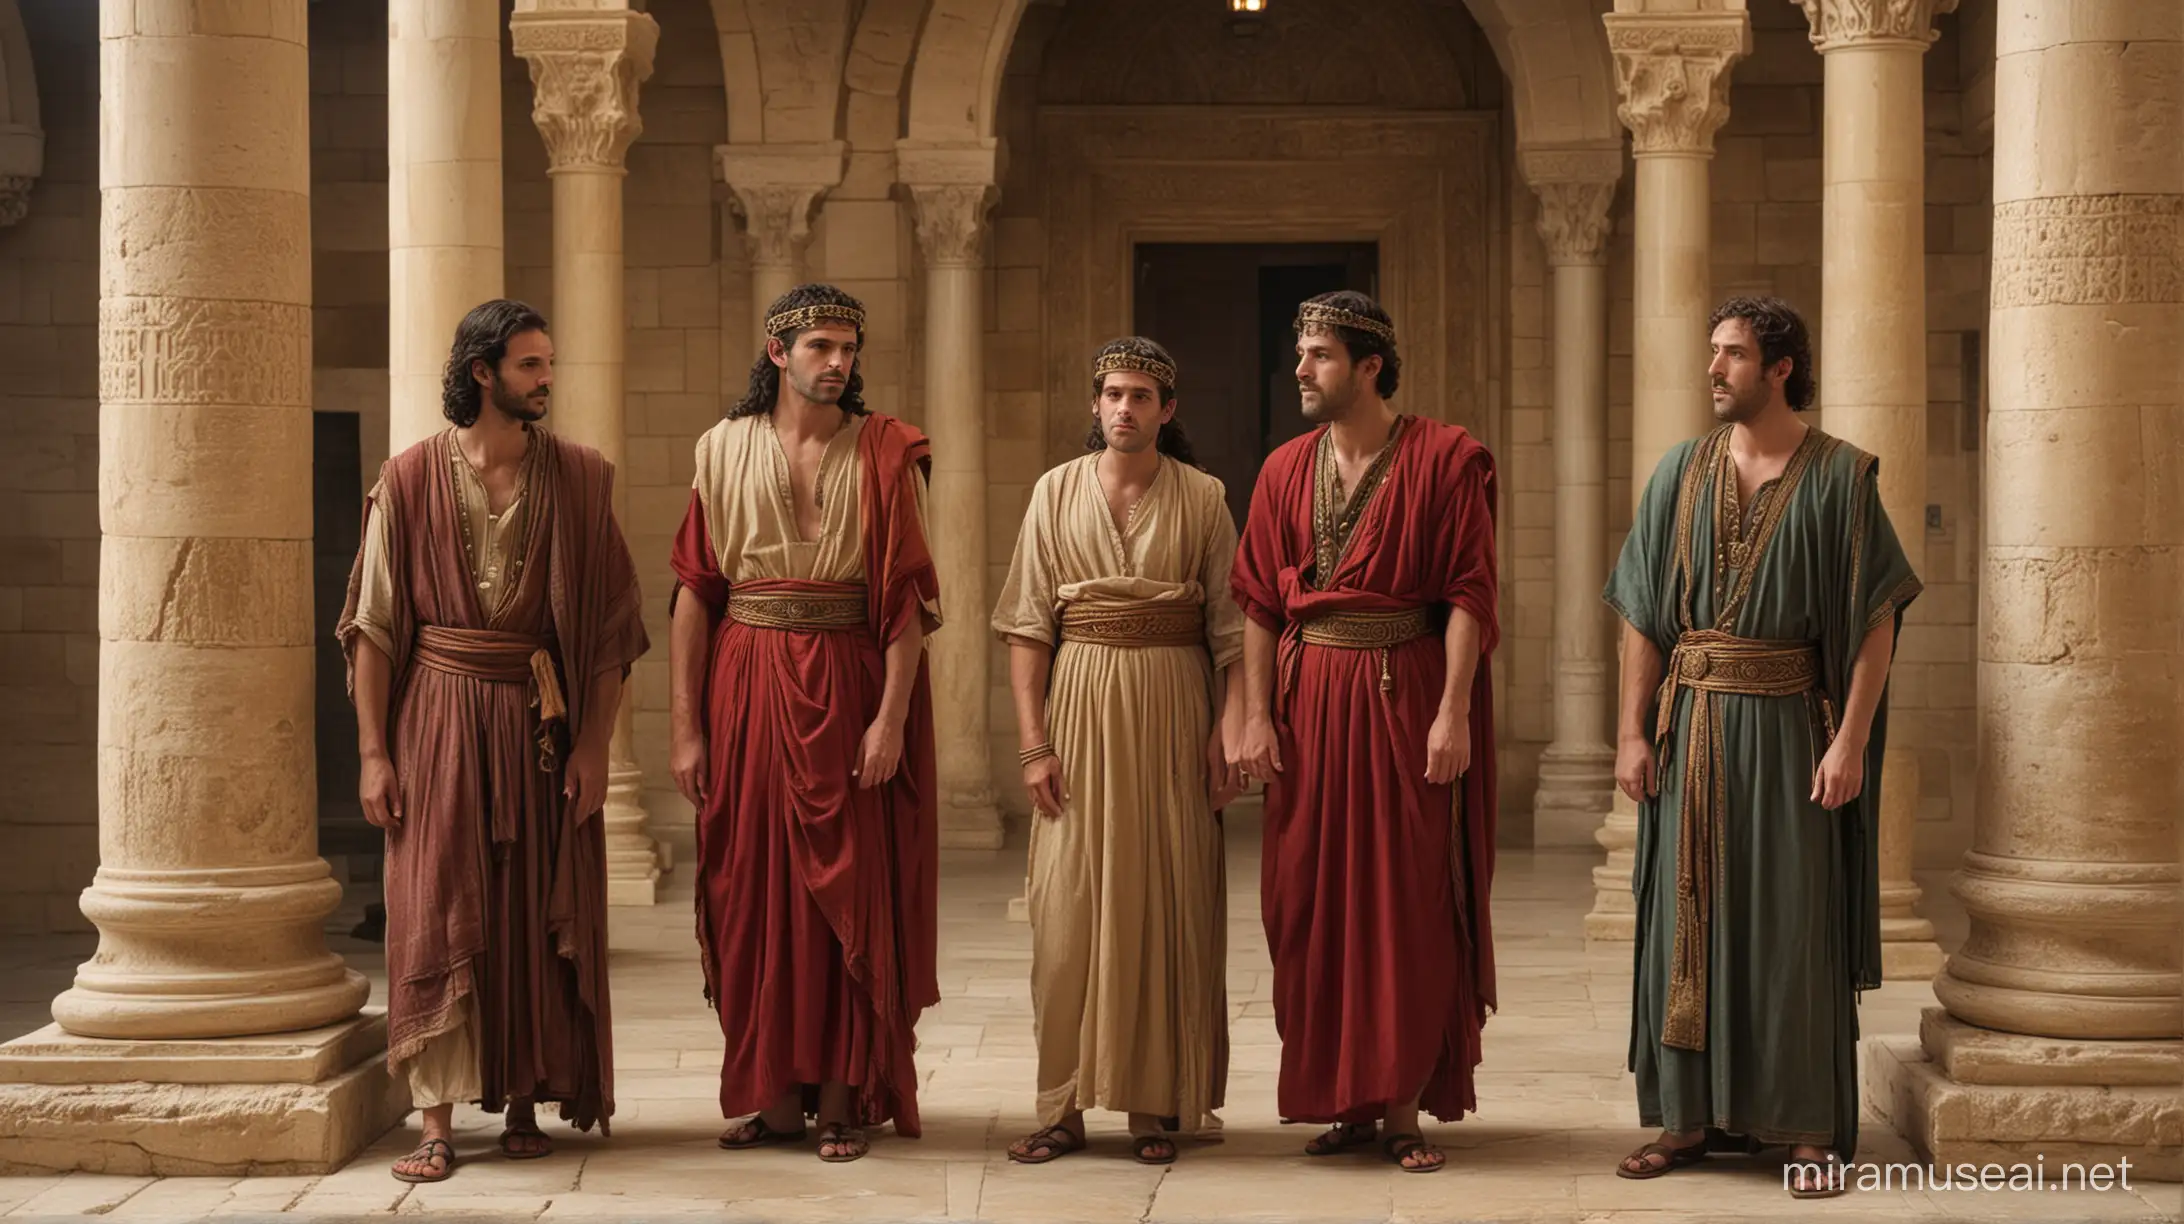 The three sons of King Herod the Great with Herod's sister Salome are inside a Palace in Jerusalem in the 1st century, the three sons are in their 30s but Salome is in her 60s and they all look worried